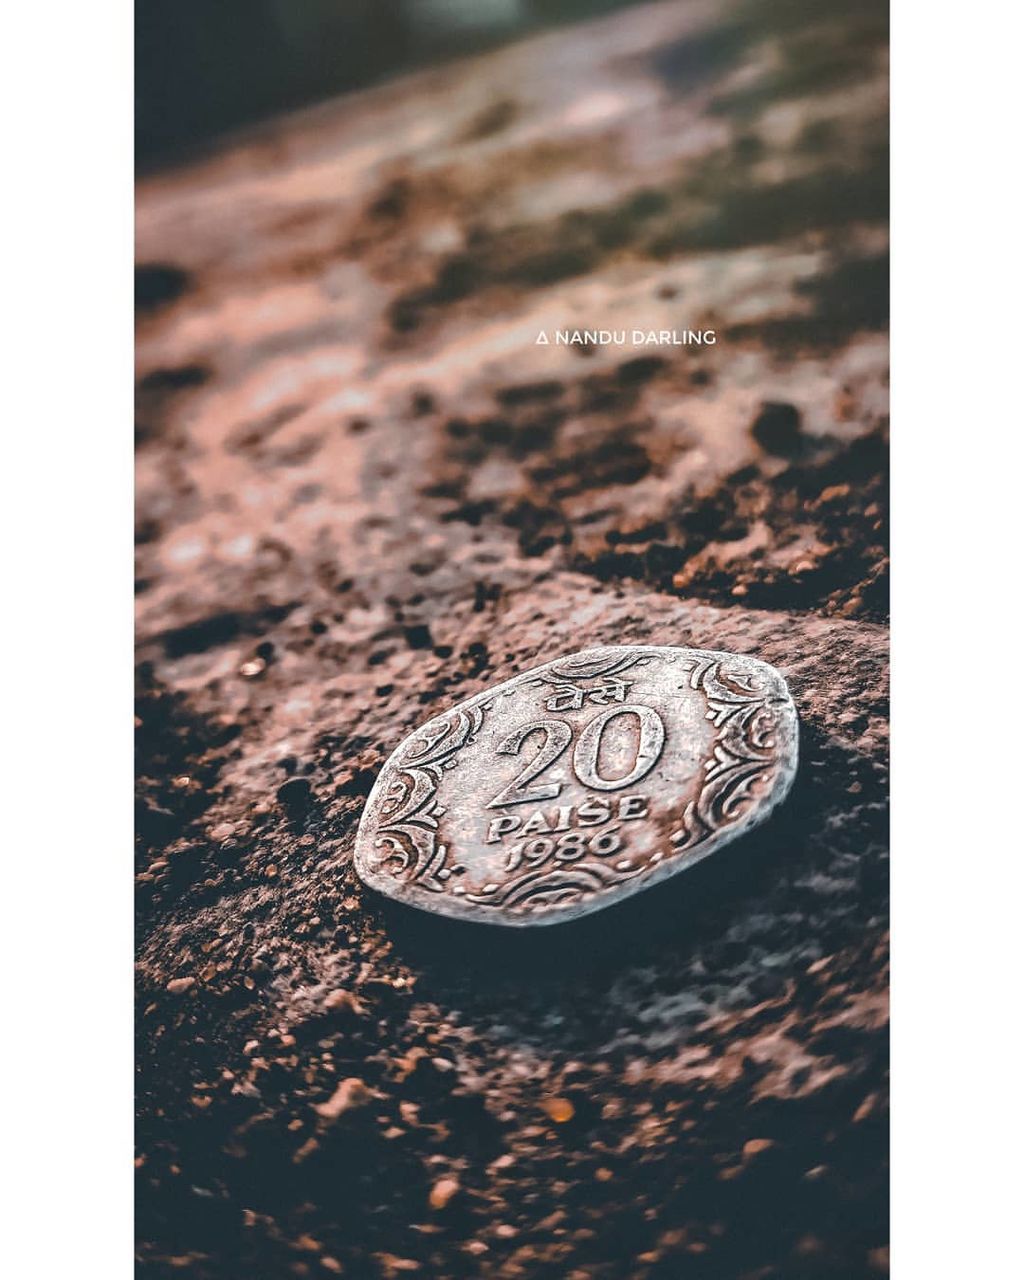 no people, close-up, coin, brown, day, metal, transfer print, text, outdoors, nature, finance, focus on foreground, auto post production filter